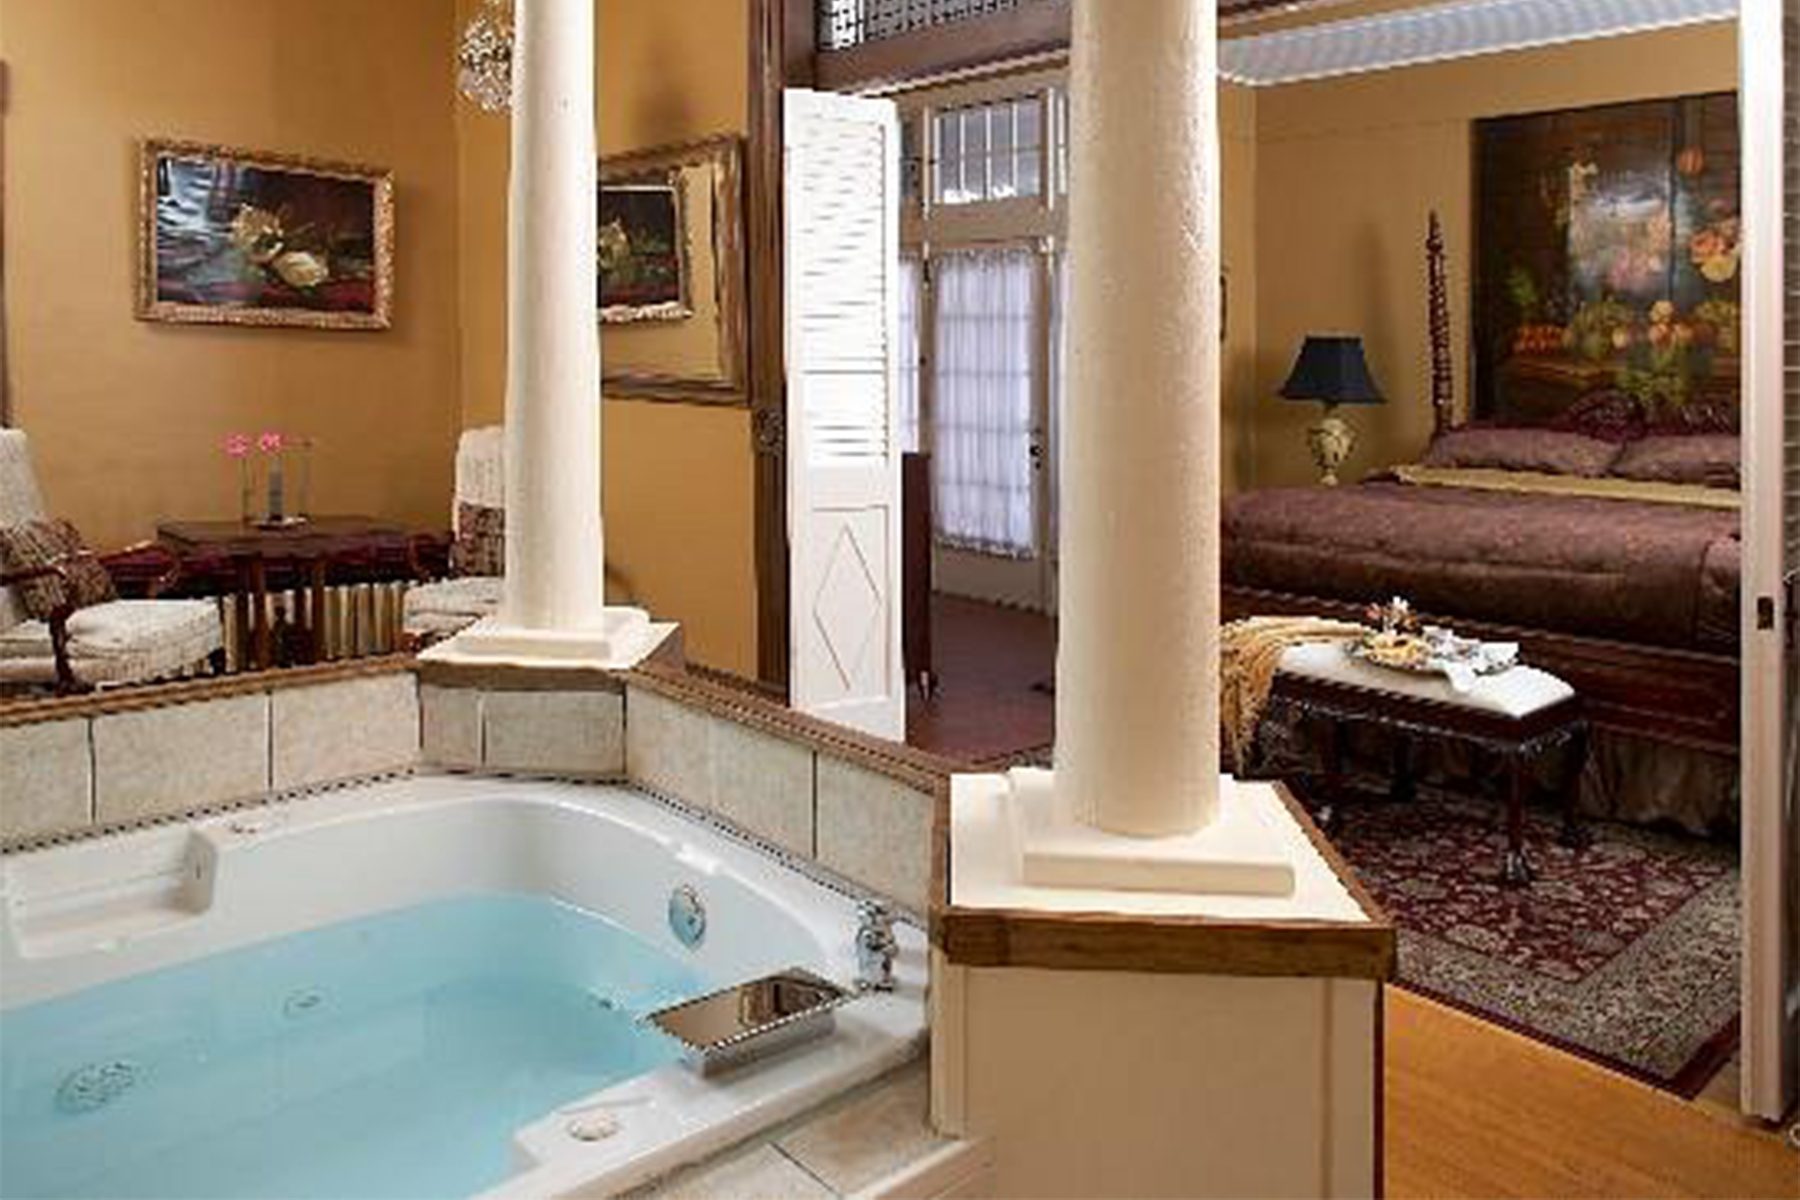 <h3 class="">Hot Springs, Arkansas</h3> <p class=""><strong>Best for: </strong>A relaxing couples getaway close to the bustling downtown of Hot Springs</p> <p>Gracious Southern hospitality is one of the highlights of a visit to the <a href="https://www.tripadvisor.com/Hotel_Review-g60856-d73147-Reviews-1890_Williams_House_Inn-Hot_Springs_Arkansas.html" rel="noopener">1890 Williams House Inn</a>, which was established as the first bed-and-breakfast in the state of Arkansas, in 1980. Guests are warmly welcomed into the beautiful historic home, located just five blocks from downtown Hot Springs, by its innkeepers and owners, Cody Waite and Joe Bolina. Visitors say Waite and Bolina were the consummate hosts and very helpful in planning their trips. They also appreciated the special touches, delightful breakfasts and perfect location.</p> <p>The main house has six guest rooms, while the carriage house offers three accommodations. There are two spacious suites on the first floor of the main house with king beds and fireplaces. The other rooms and suites have either one or two queen beds or a king bed, and the Copper Cottage is handicap accessible and pet-friendly.</p> <p>Breakfast begins each morning with poppy-seed bread, homemade muffins or other baked goods and fruit. Daily main dishes include everything from breakfast paninis to savory quiches or stuffed French toast. Guests staying in three of the suites can have breakfast delivered to their room. You'll also find snacks and beverages available 24 hours a day.</p> <p><strong>Pros:</strong></p> <ul> <li class="">One dog up to 30 pounds is permitted in the Copper Cottage (rules and fees apply)</li> <li class="">Located close to downtown</li> <li class="">Gracious and friendly hosts</li> </ul> <p><strong>Con: </strong></p> <ul> <li class="">Children must be 12 or older to stay at the property</li> </ul> <p class="listicle-page__cta-button-shop"><a class="shop-btn" href="https://www.tripadvisor.com/Hotel_Review-g60856-d73147-Reviews-1890_Williams_House_Inn-Hot_Springs_Arkansas.html">Book Now</a></p>